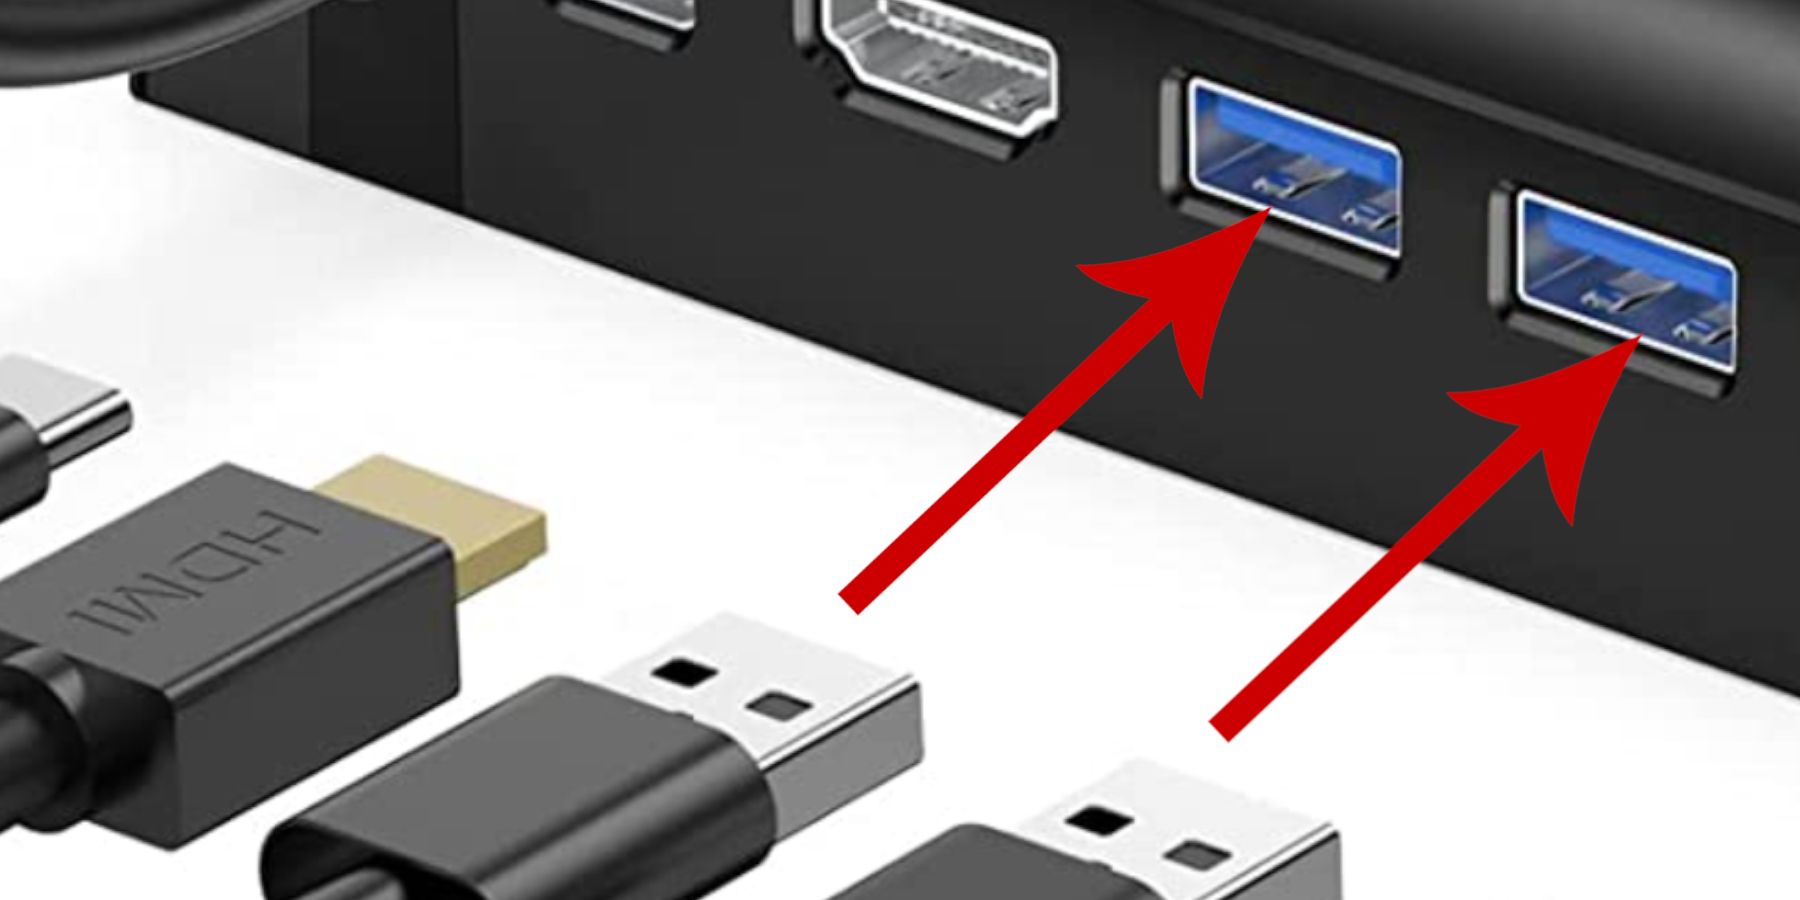 Steam Deck USB ports on the docking station